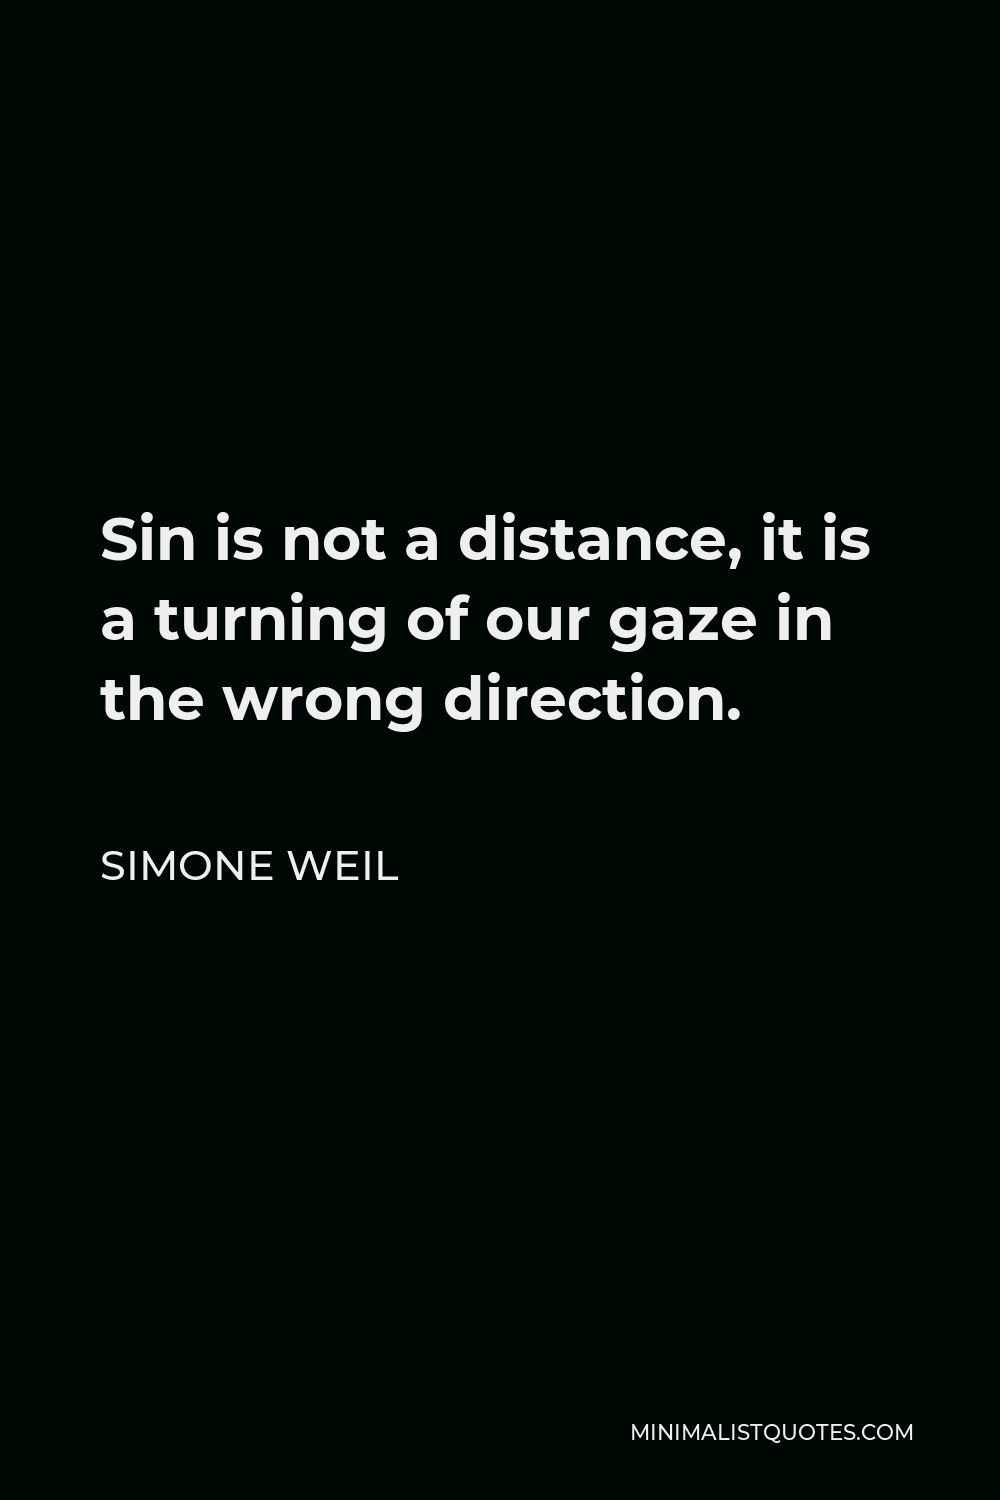 Simone Weil Quote - Sin is not a distance, it is a turning of our gaze in the wrong direction.